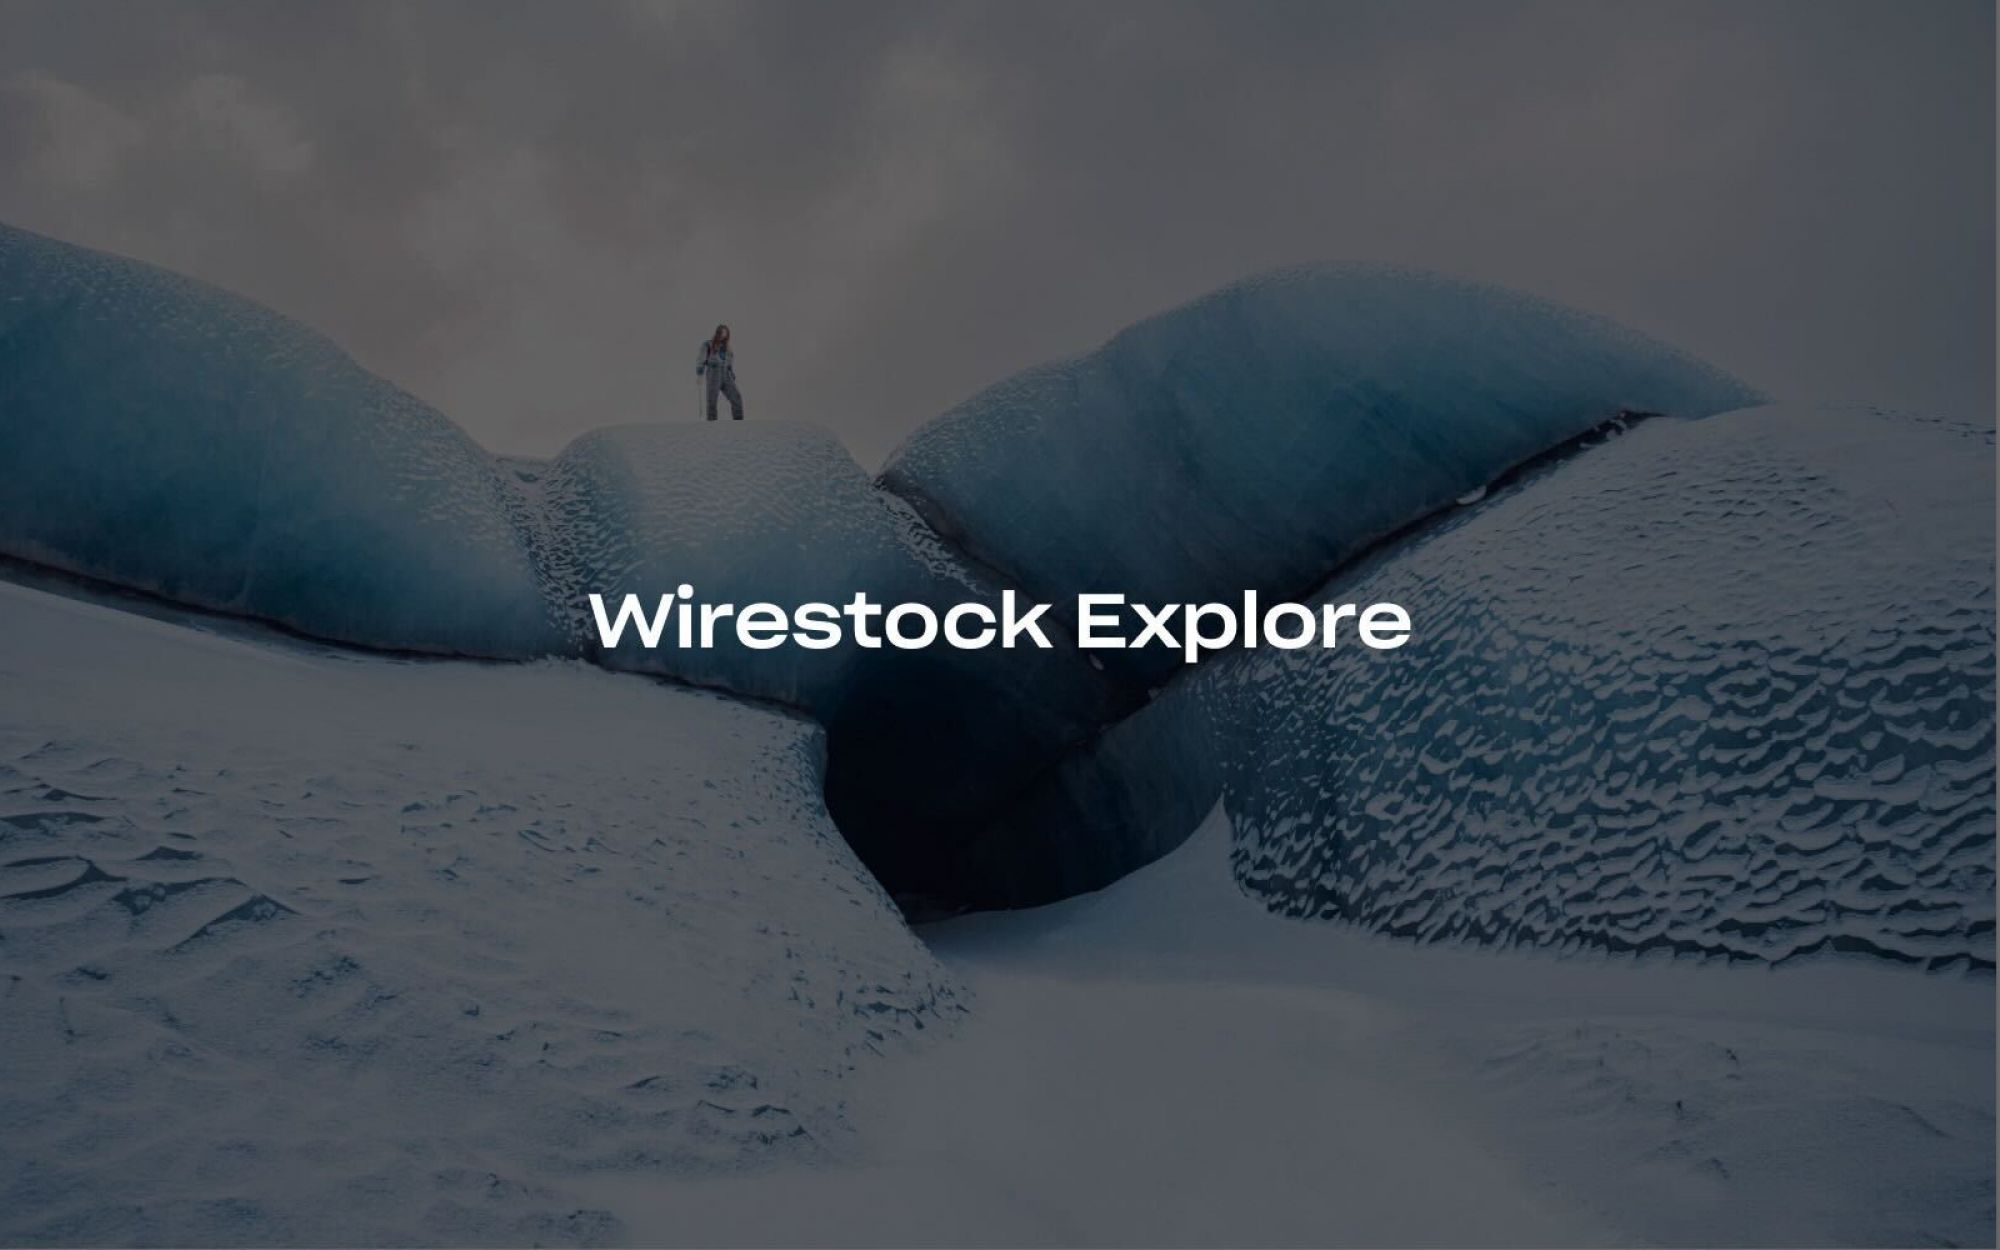 What are Wirestock's new updates?